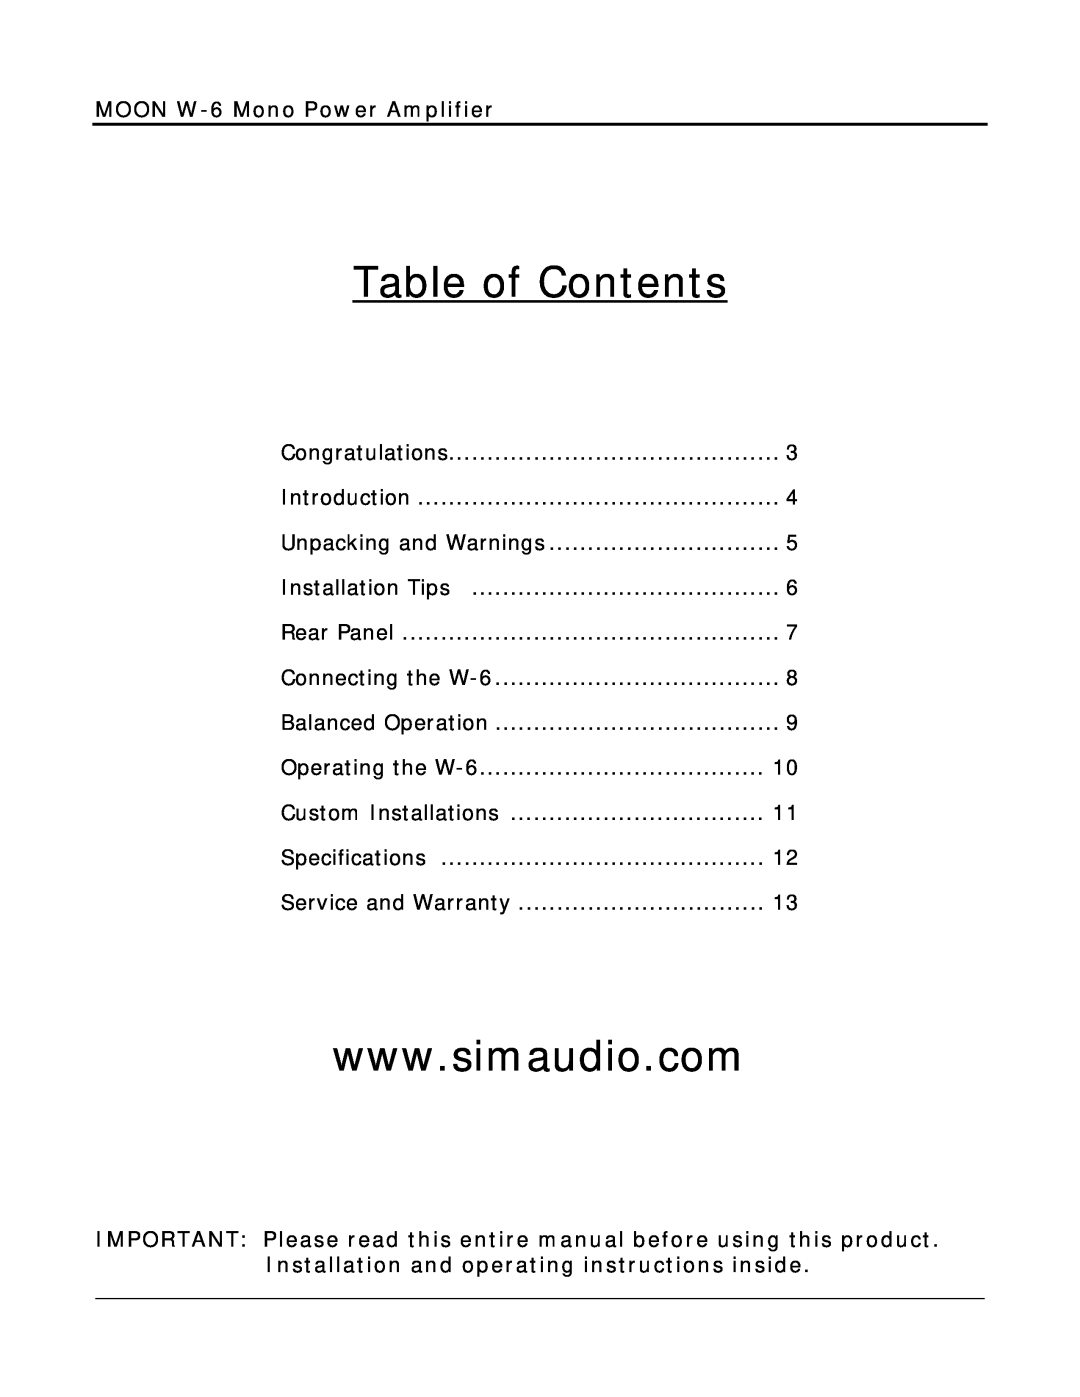 Simaudio owner manual Table of Contents, MOON W-6Mono Power Amplifier 